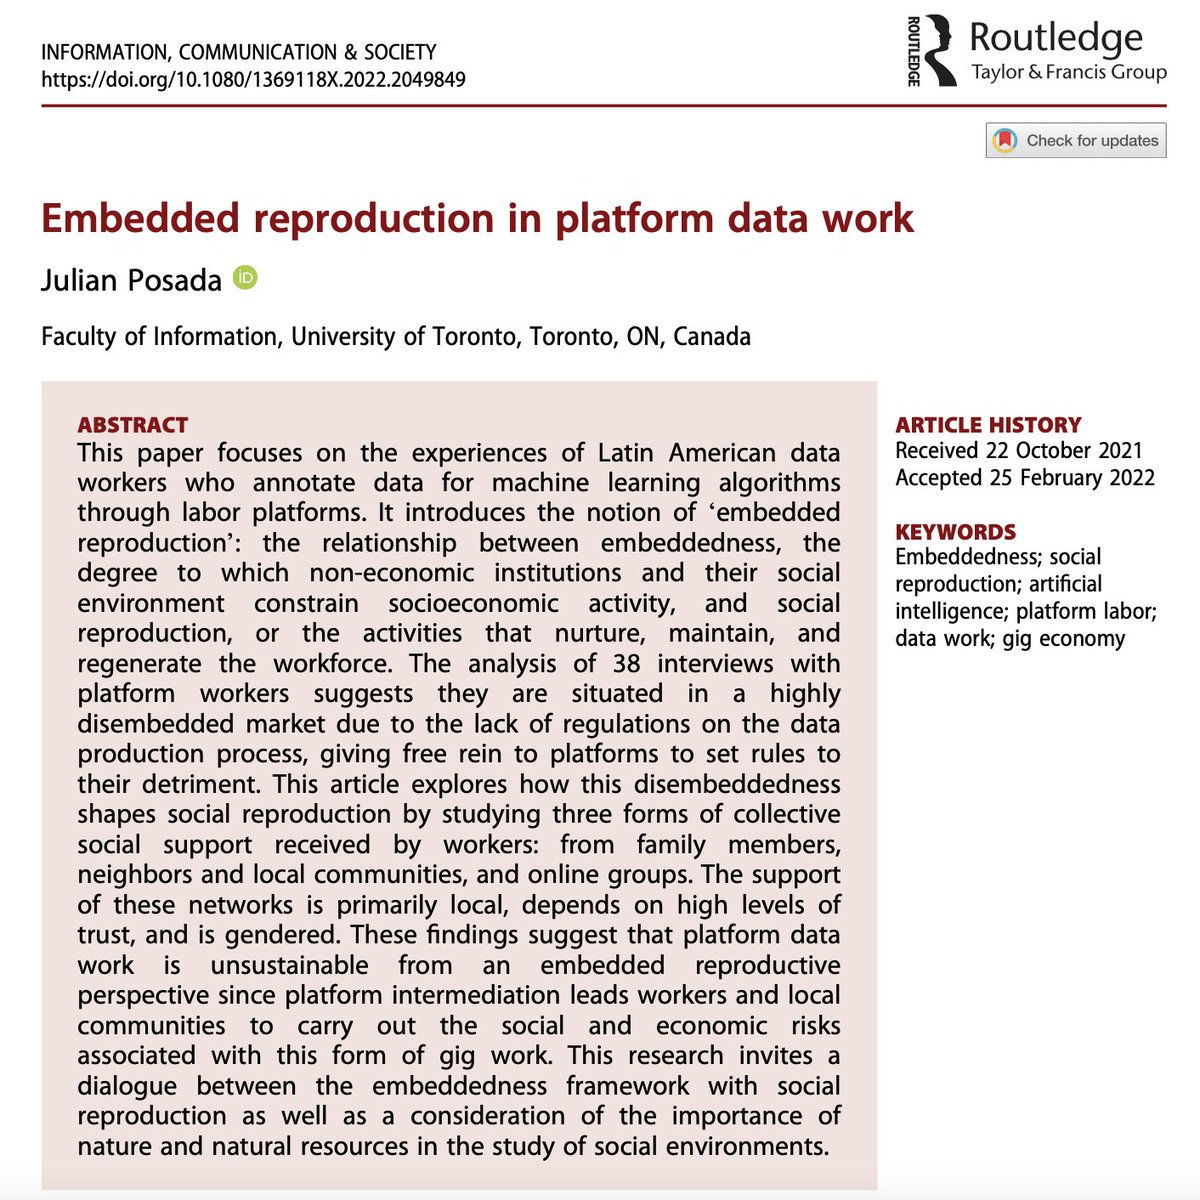 I’m beyond excited to share my first single-authored peer-reviewed paper and the first major publication from my doctoral research: “Embedded Reproduction in Platform Data Work,” now available in the new issue of Information, Communication & Society! Links below 👇